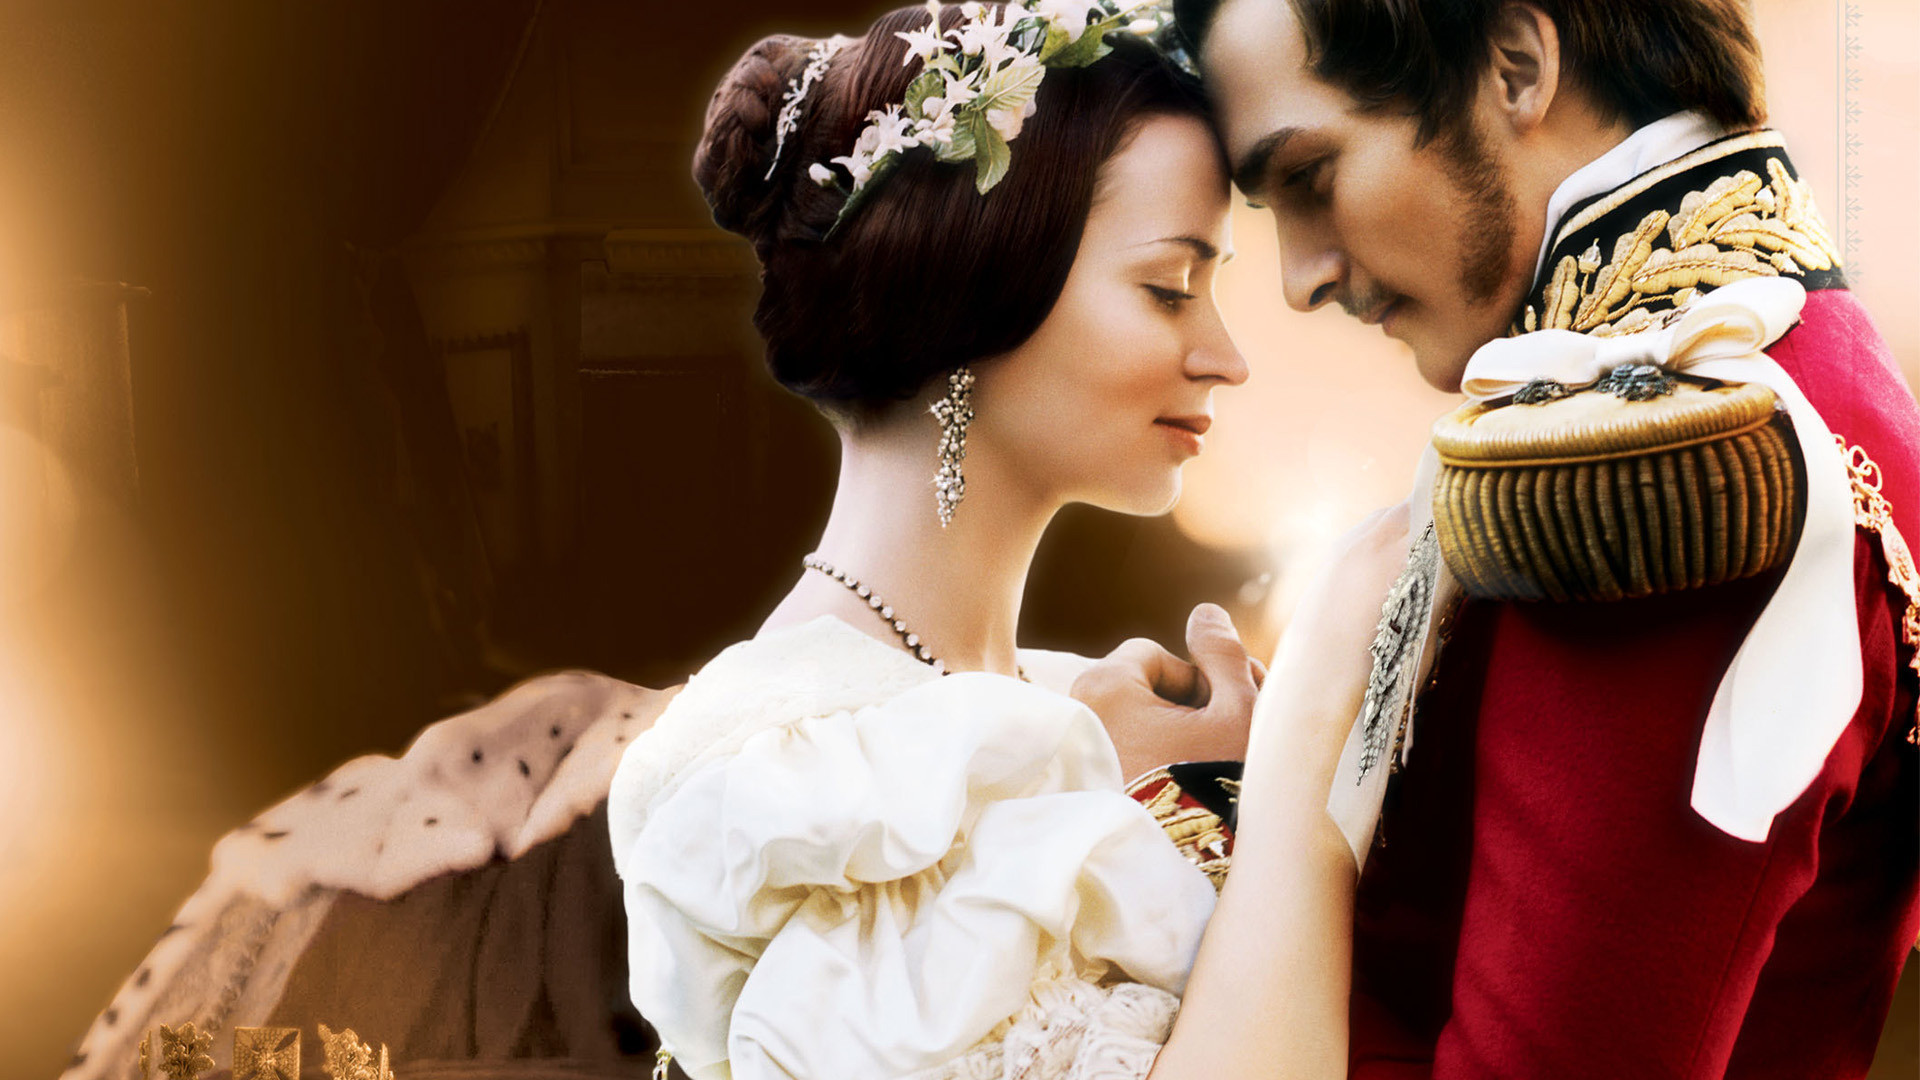 Movie The Young Victoria HD Wallpaper | Background Image